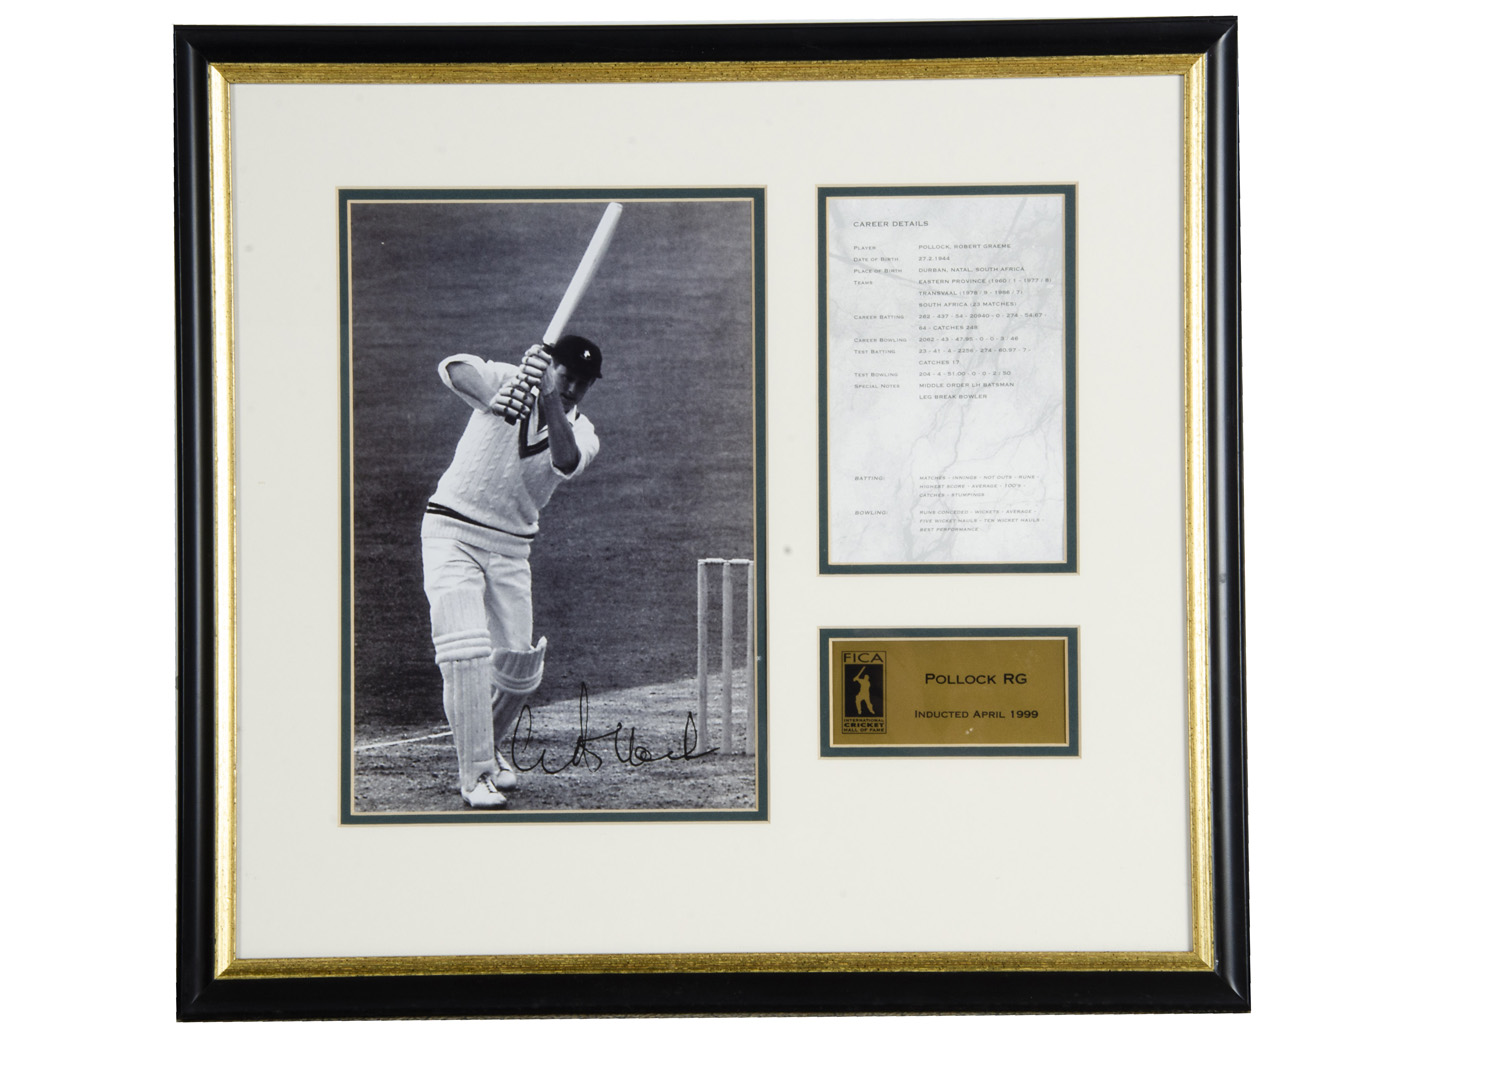 Graeme Pollock, signed black and white photograph with the induction to the hall of fame and his